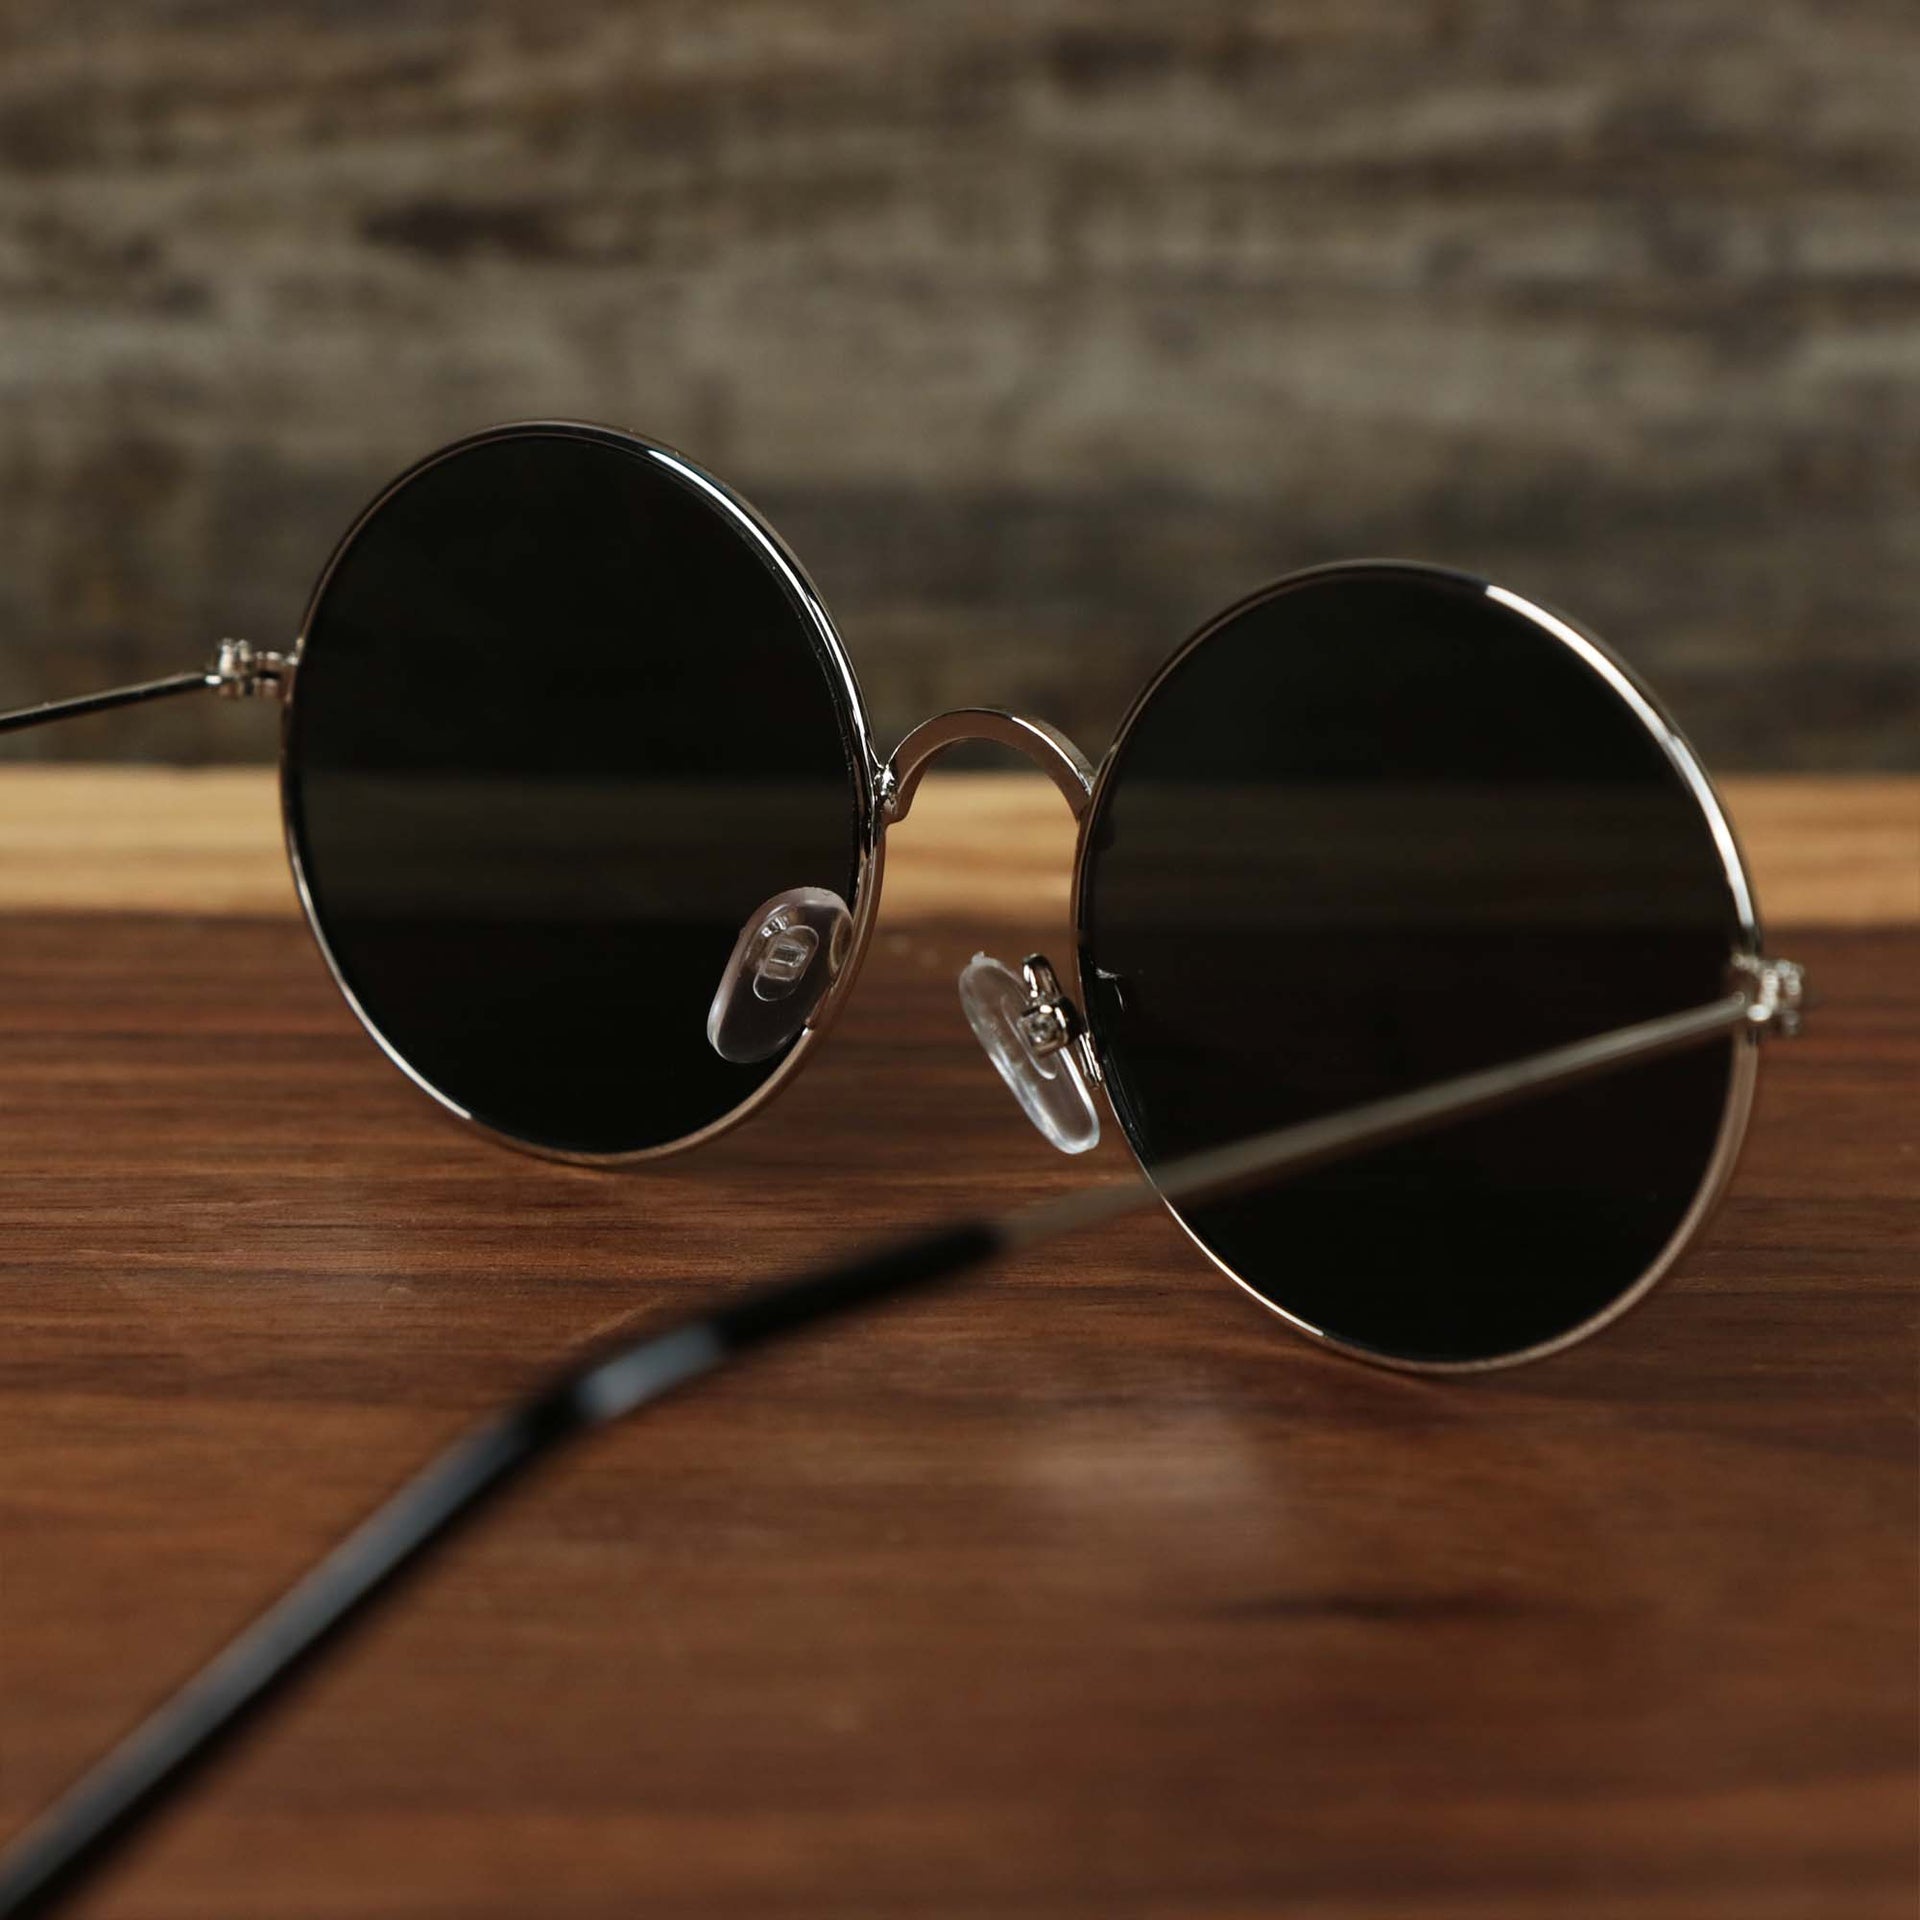 The inside of the Youth Round Frame Black Lens Sunglasses with Silver Frame